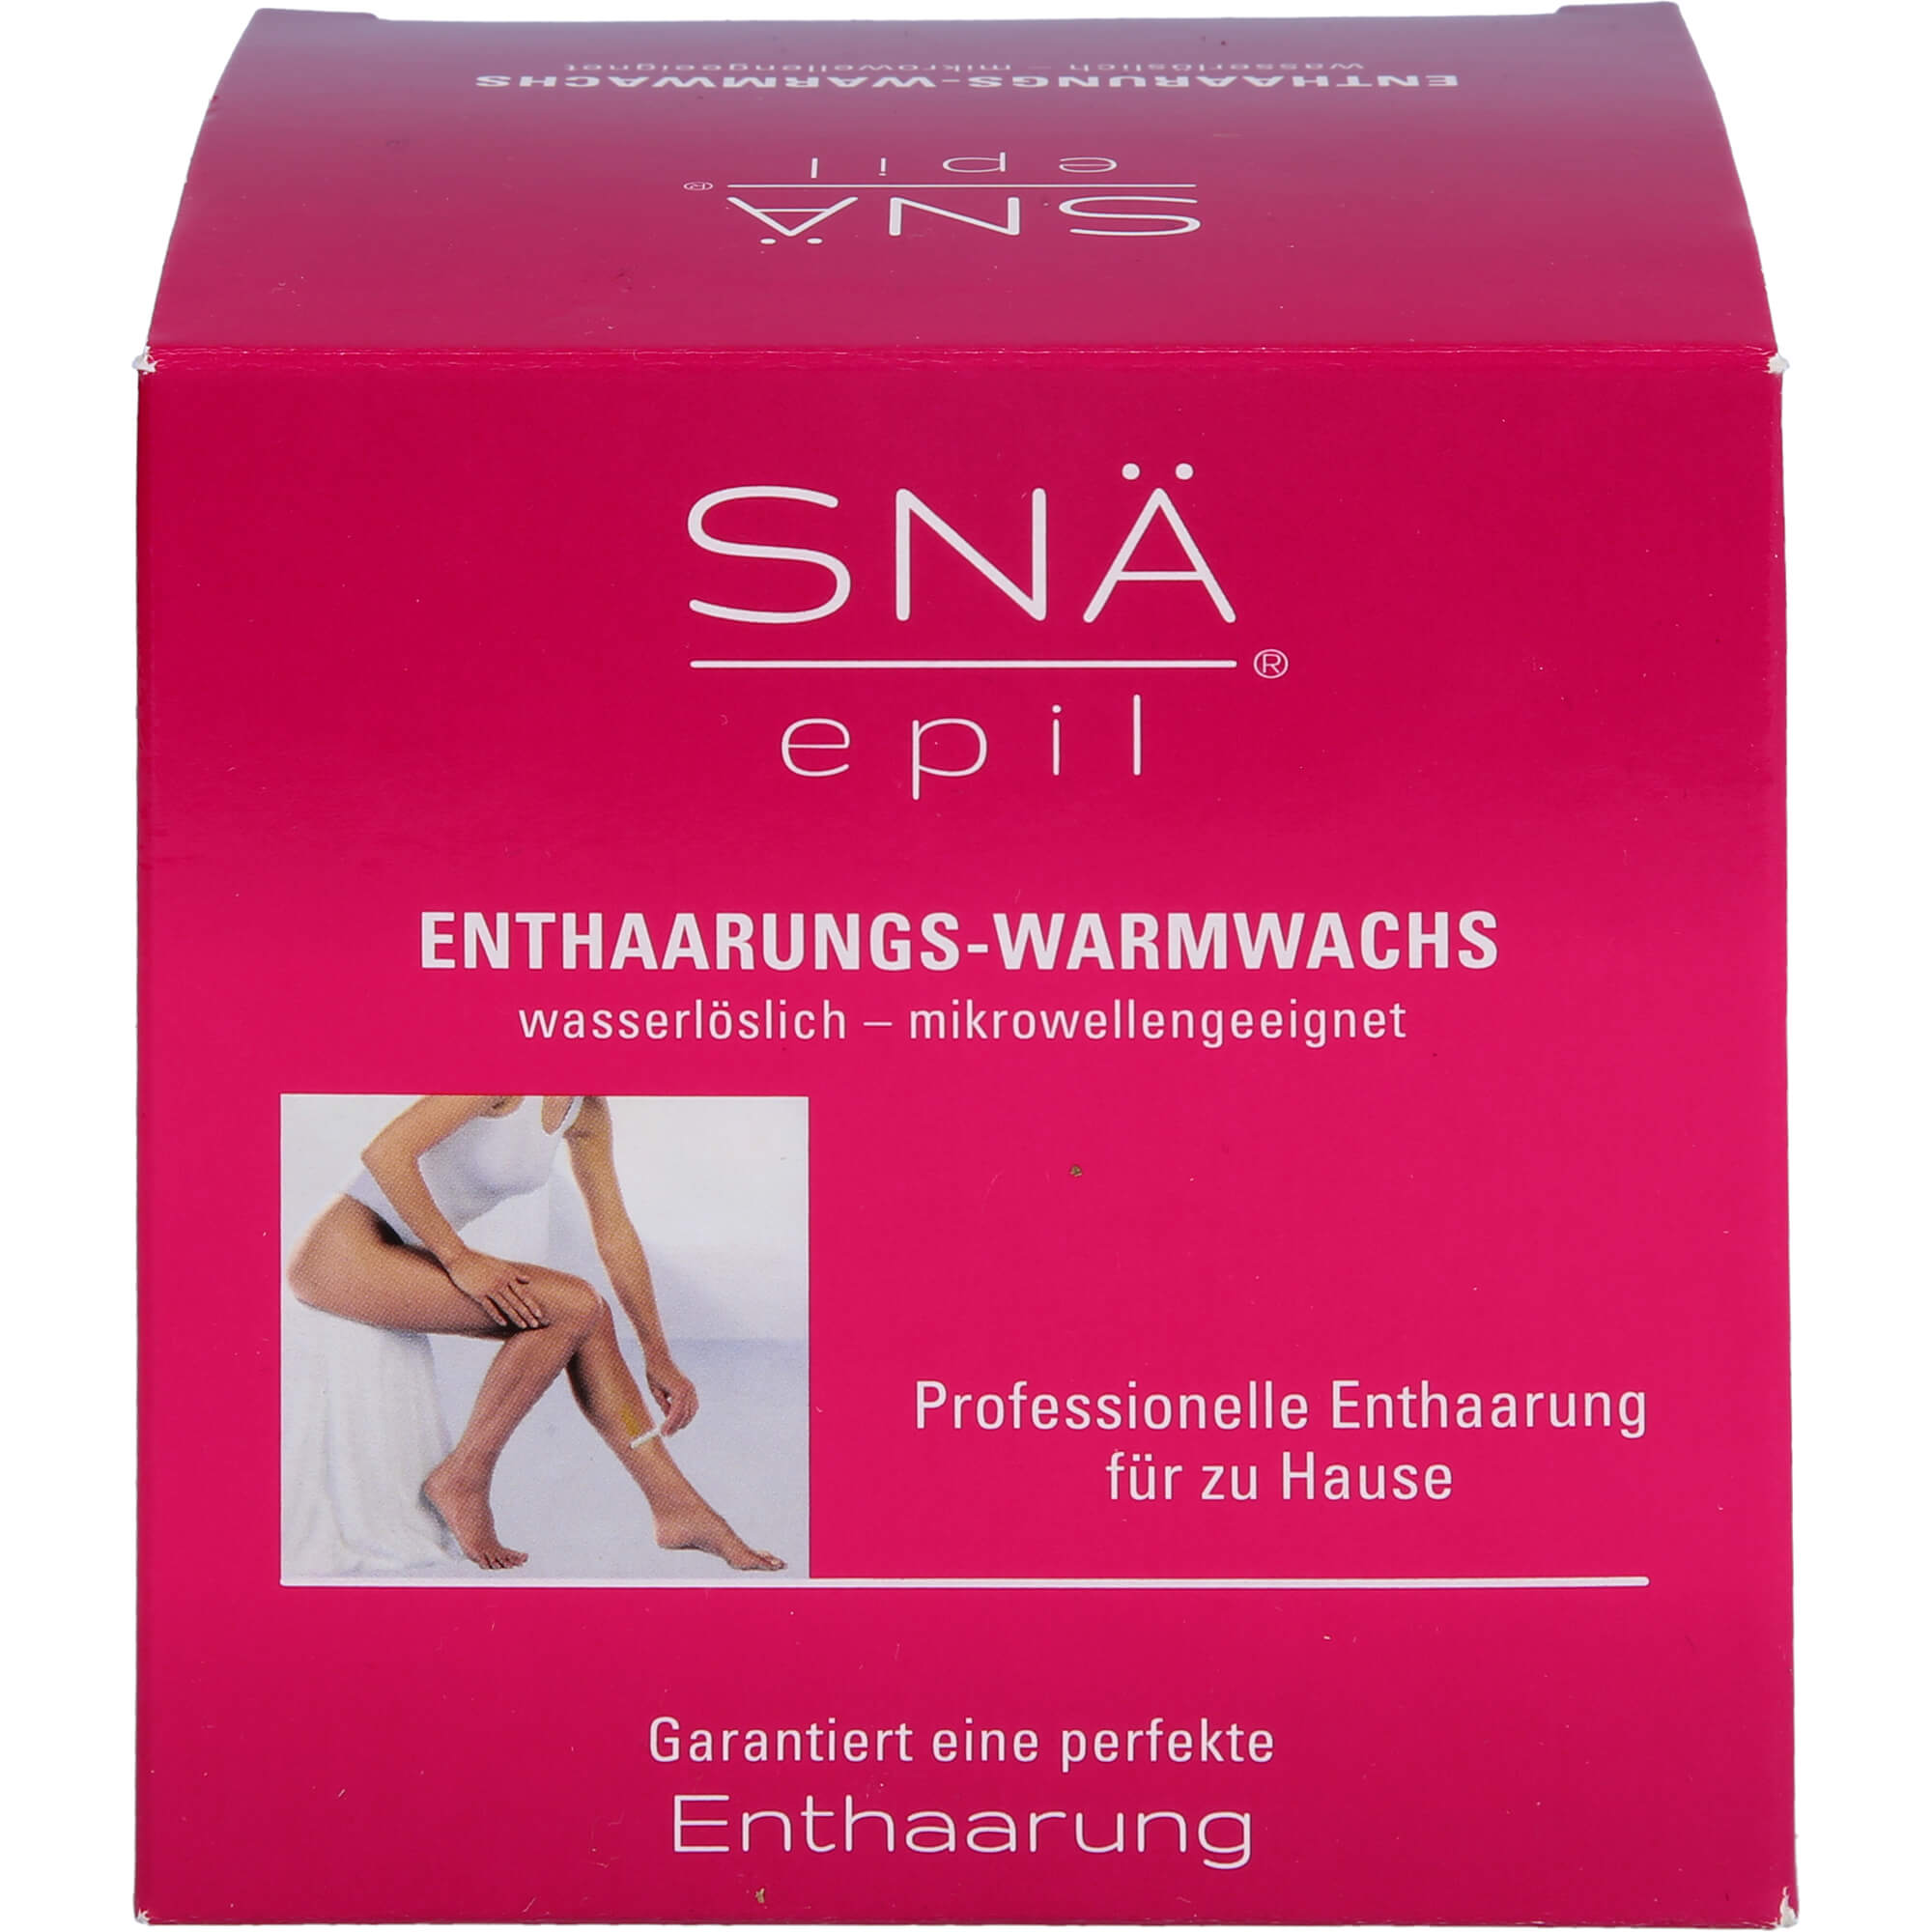 ENTHAARUNGS WARMWACHS Snae Epil